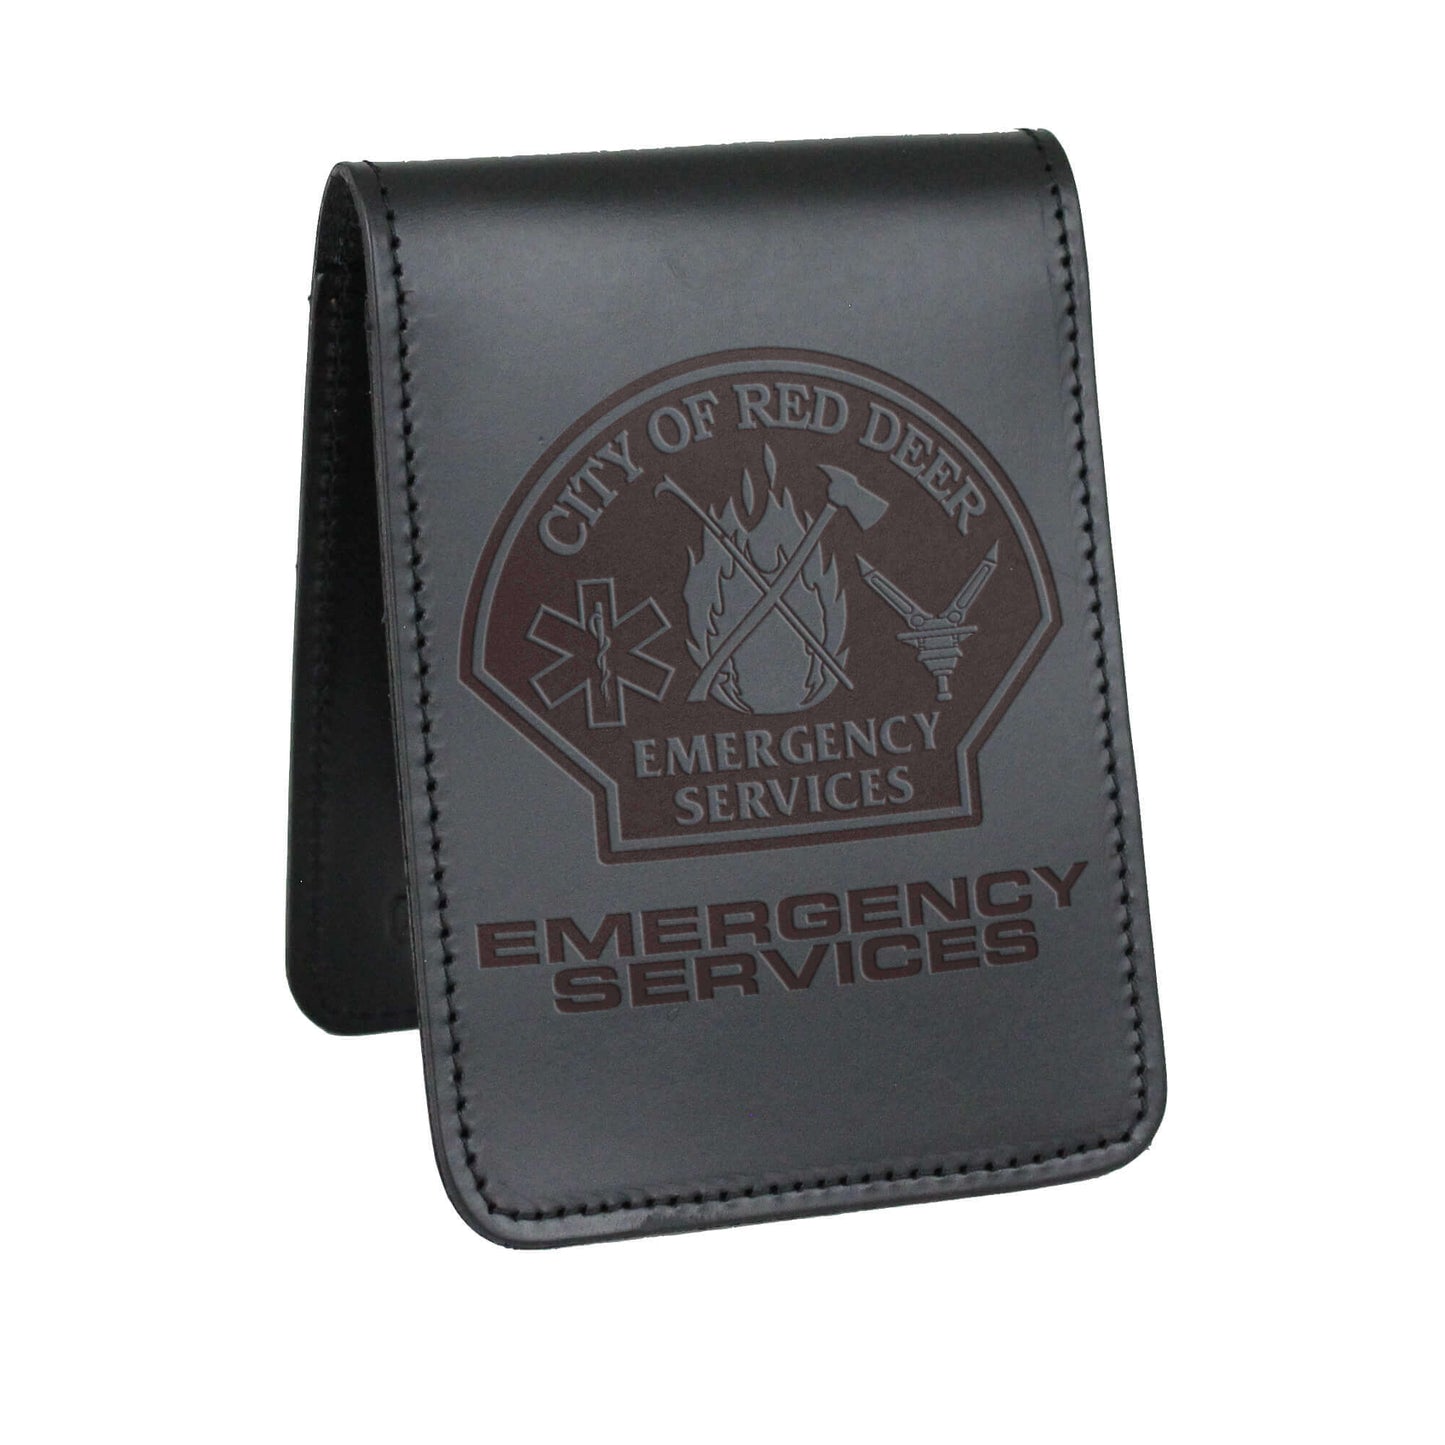 Red Deer Emergency Services Notebook Cover